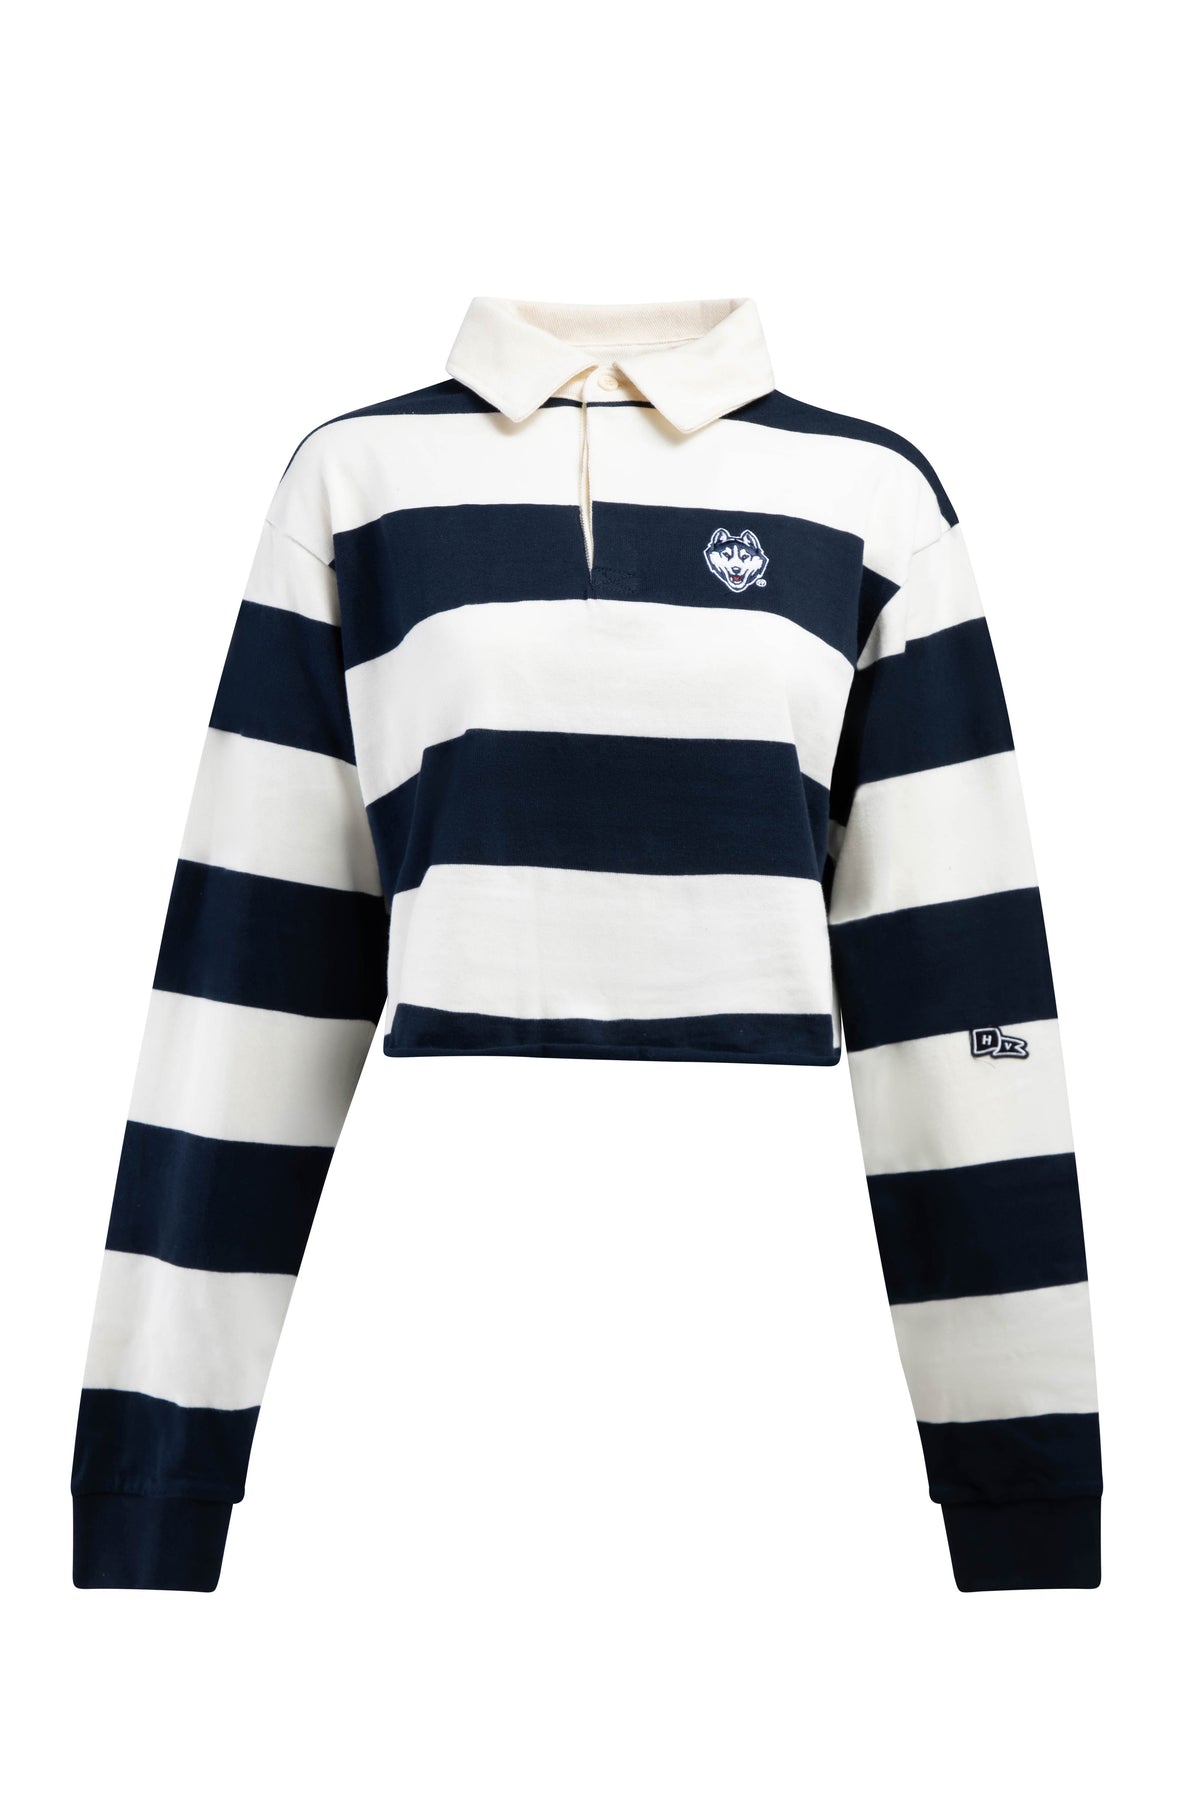 UConn Rugby Top